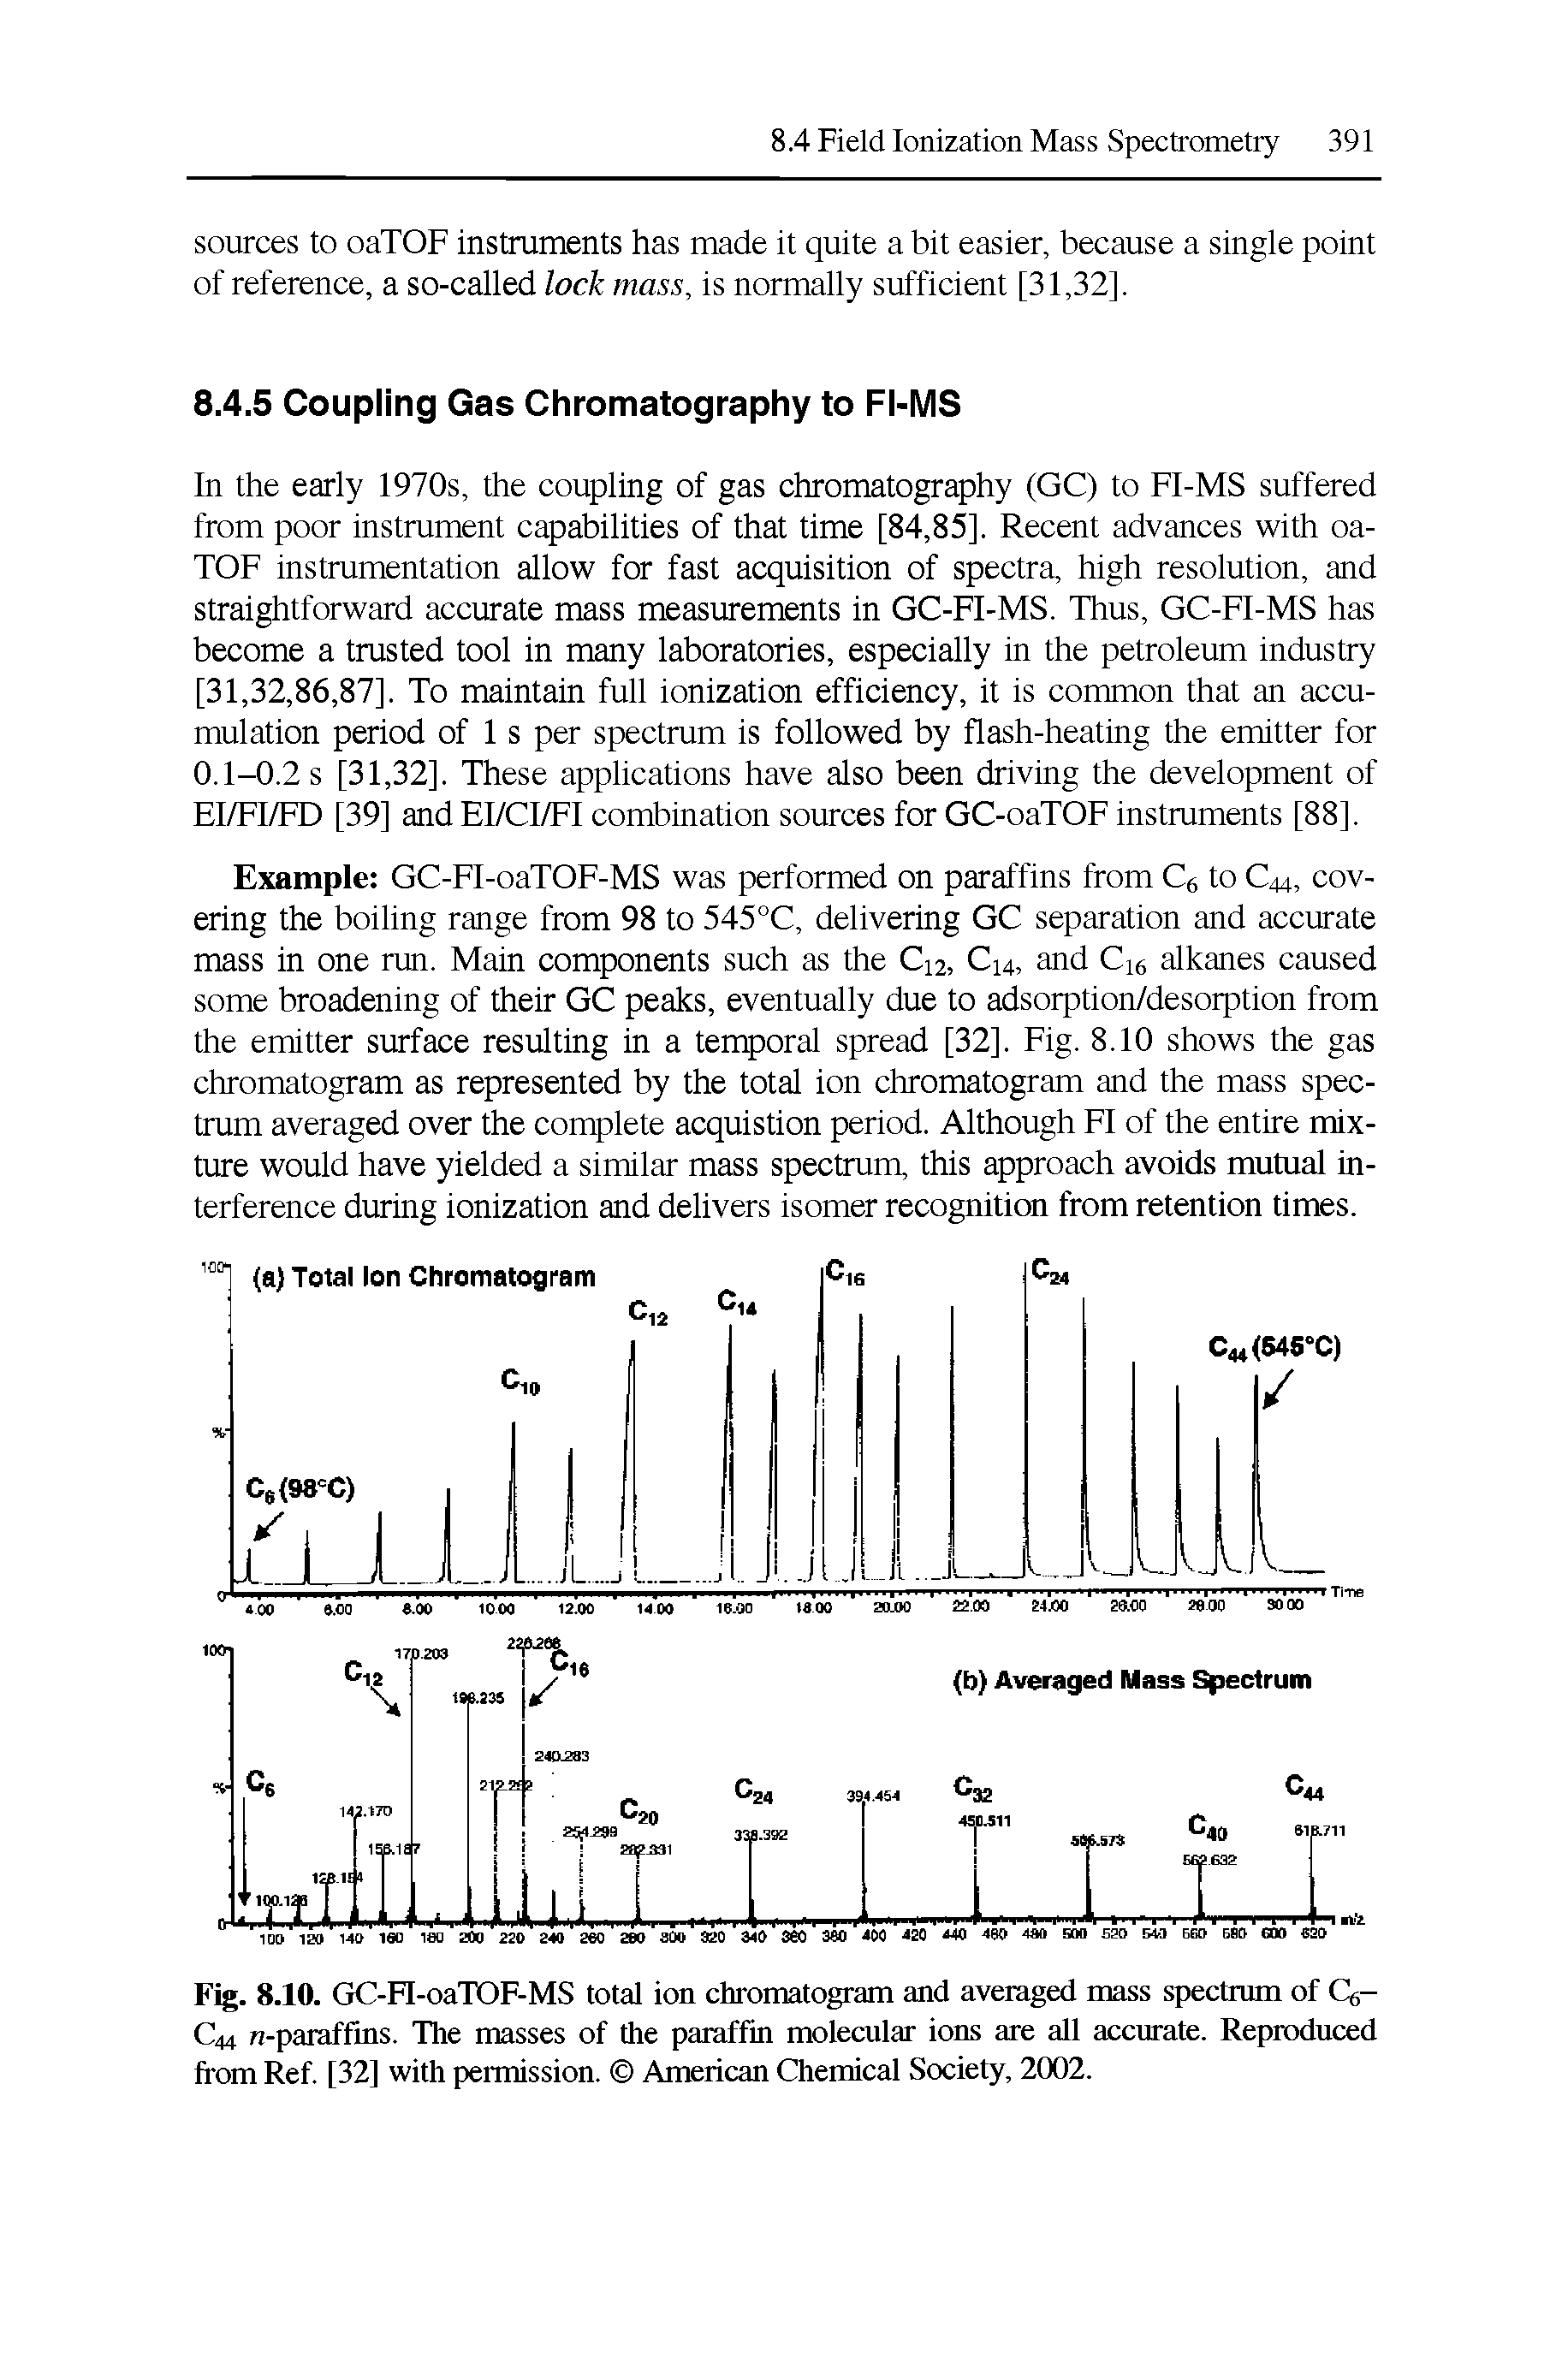 Fig. 8.10. GC-H-oaTOF-MS total ion chromatogram and averaged mass spectrum of Q-C44 -paraffins. The masses of the paraffin molecular ions are all accurate. Reproduced from Ref. [32] with permission. American Chemical Society, 2002.